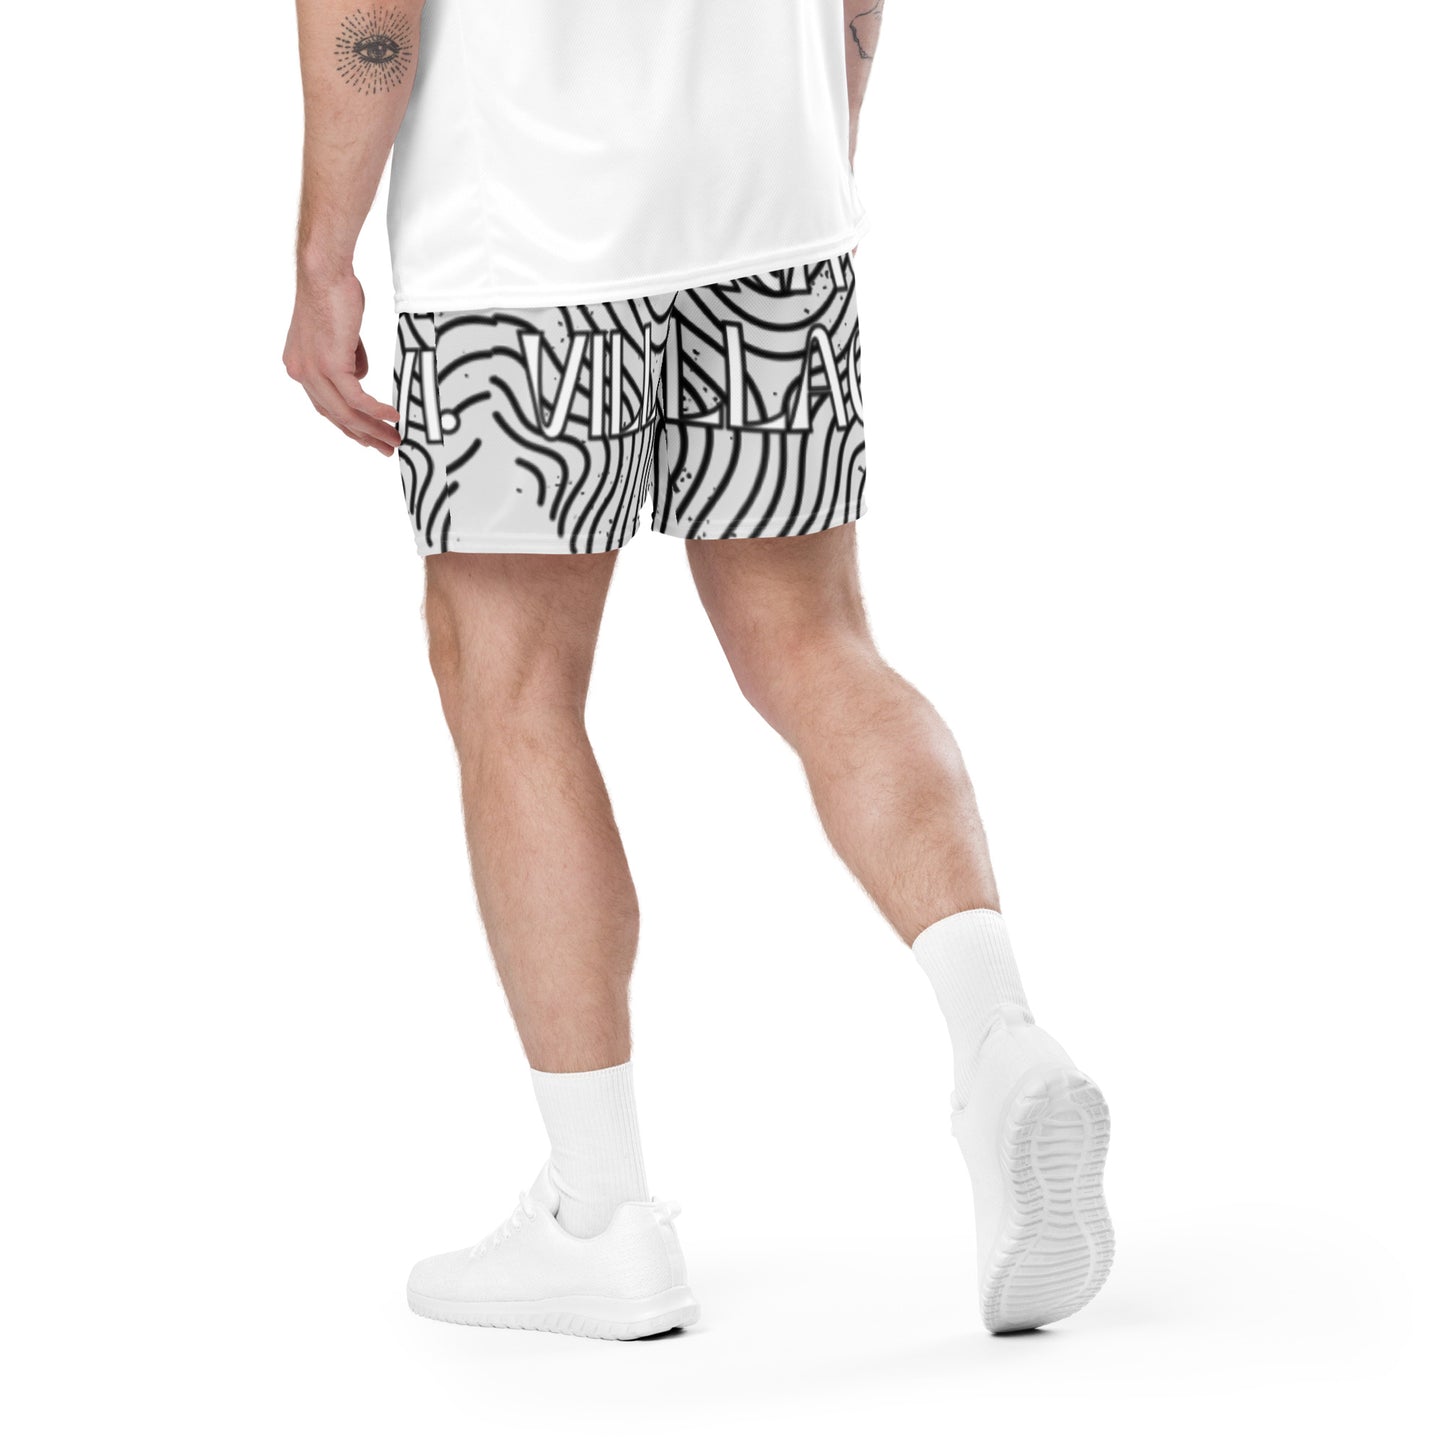 [Downtown] - Unisex (Recycled) Mesh Basketball Shorts (Light)